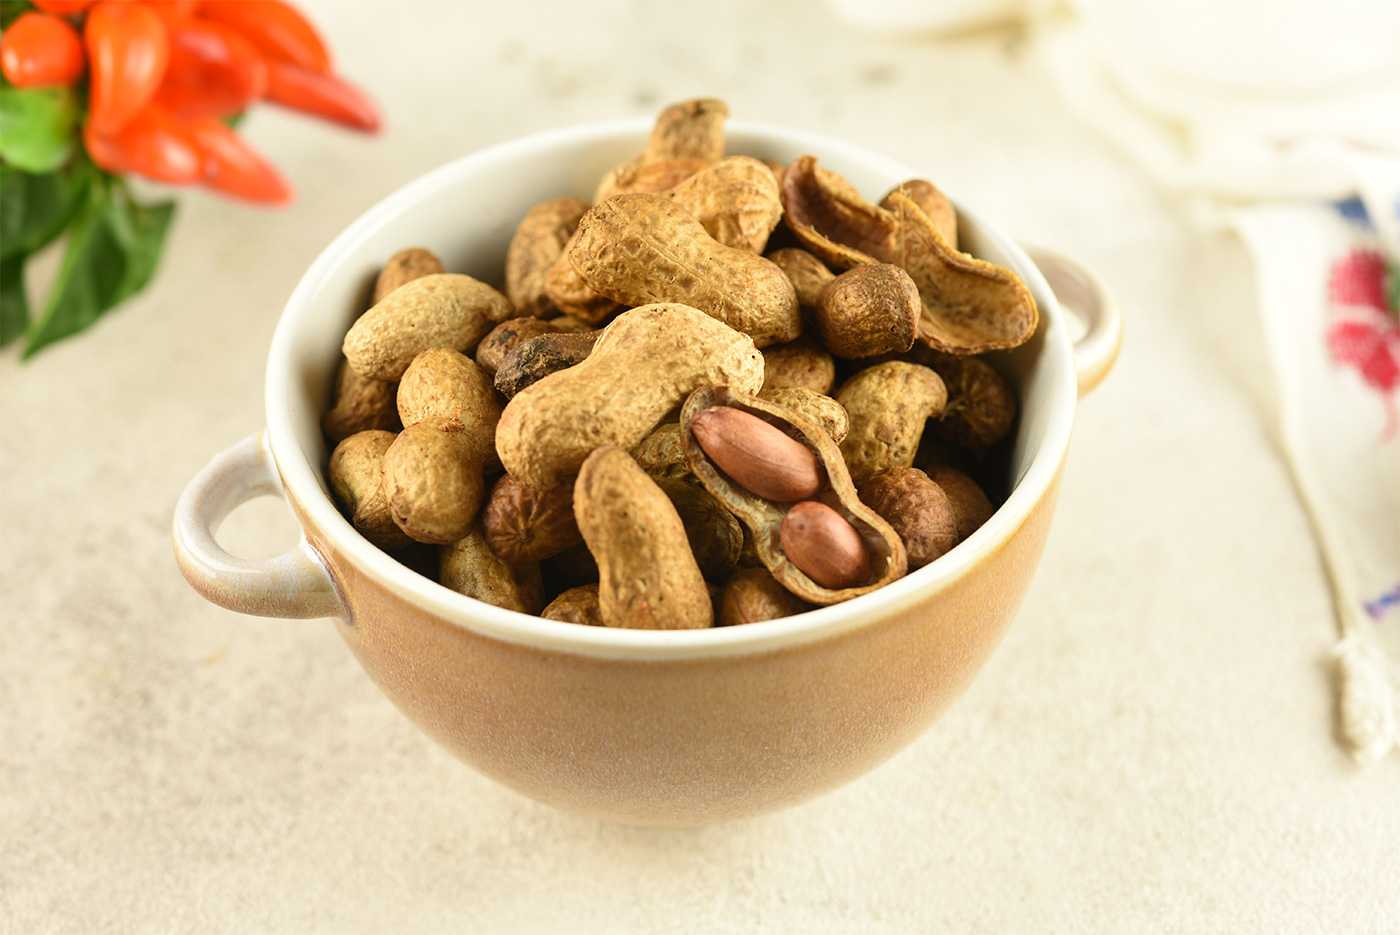 peanuts with shells inside a cup top view